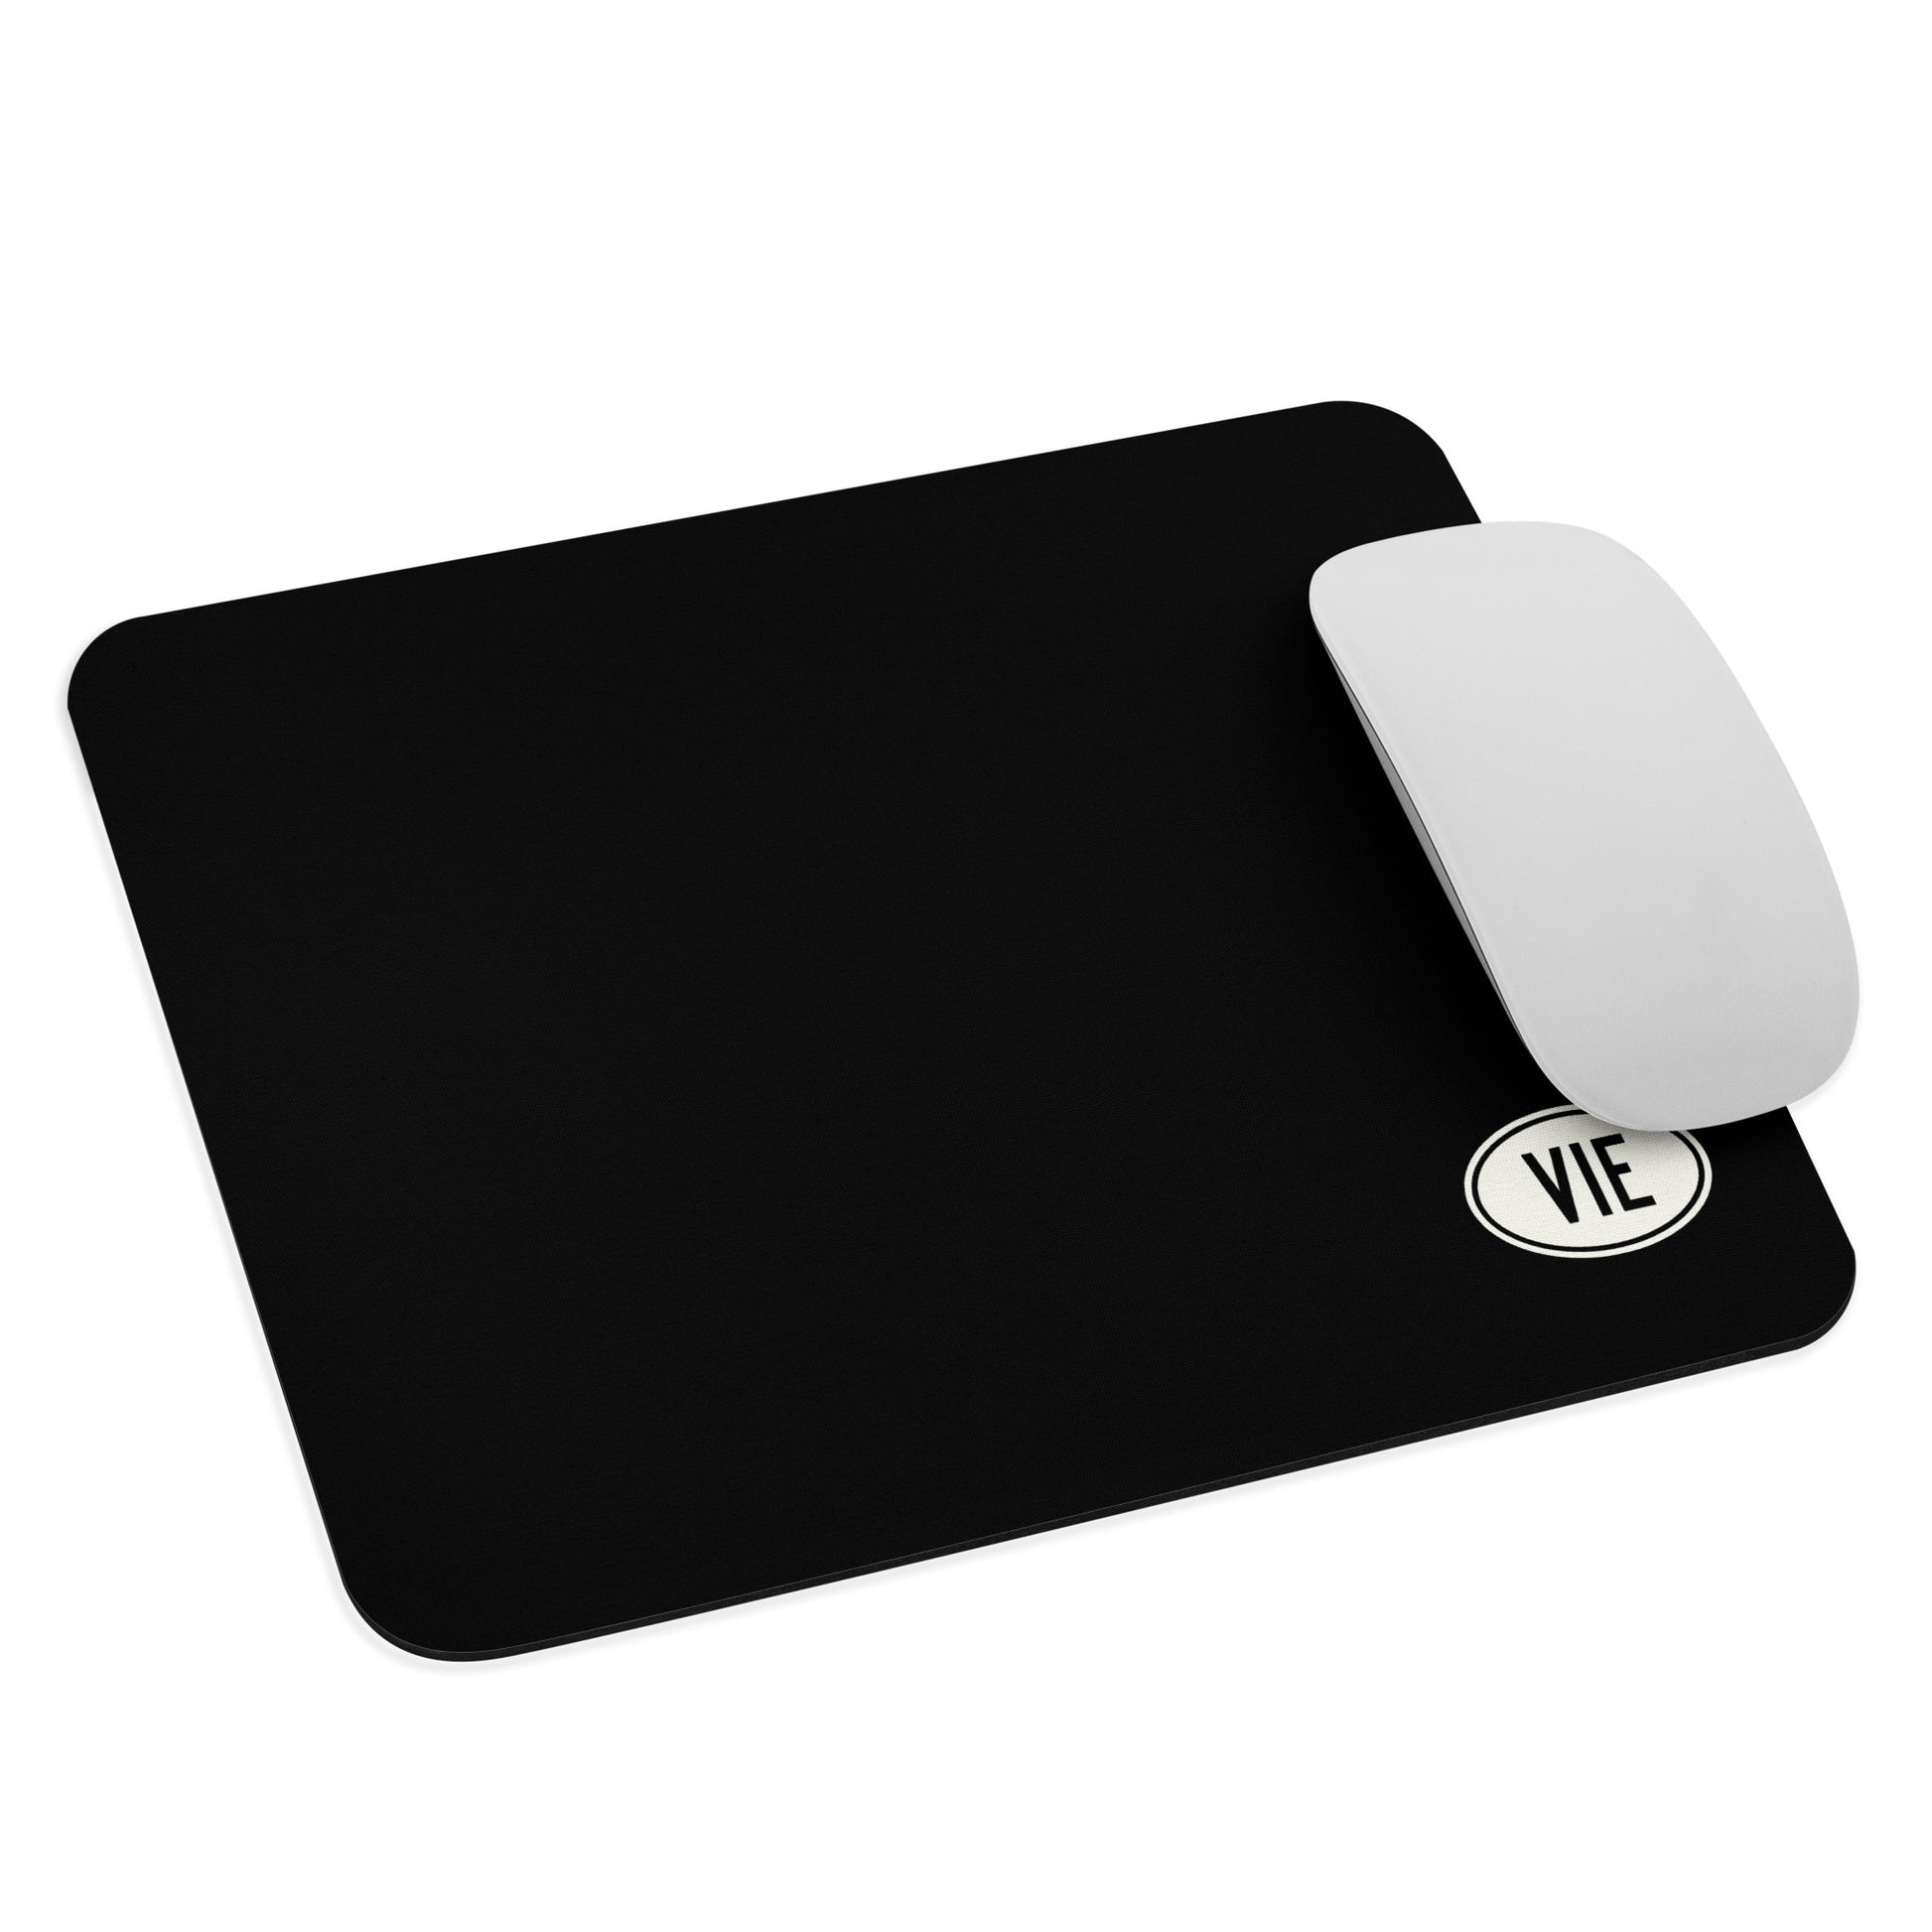 Unique Travel Gift Mouse Pad - White Oval • VIE Vienna • YHM Designs - Image 03